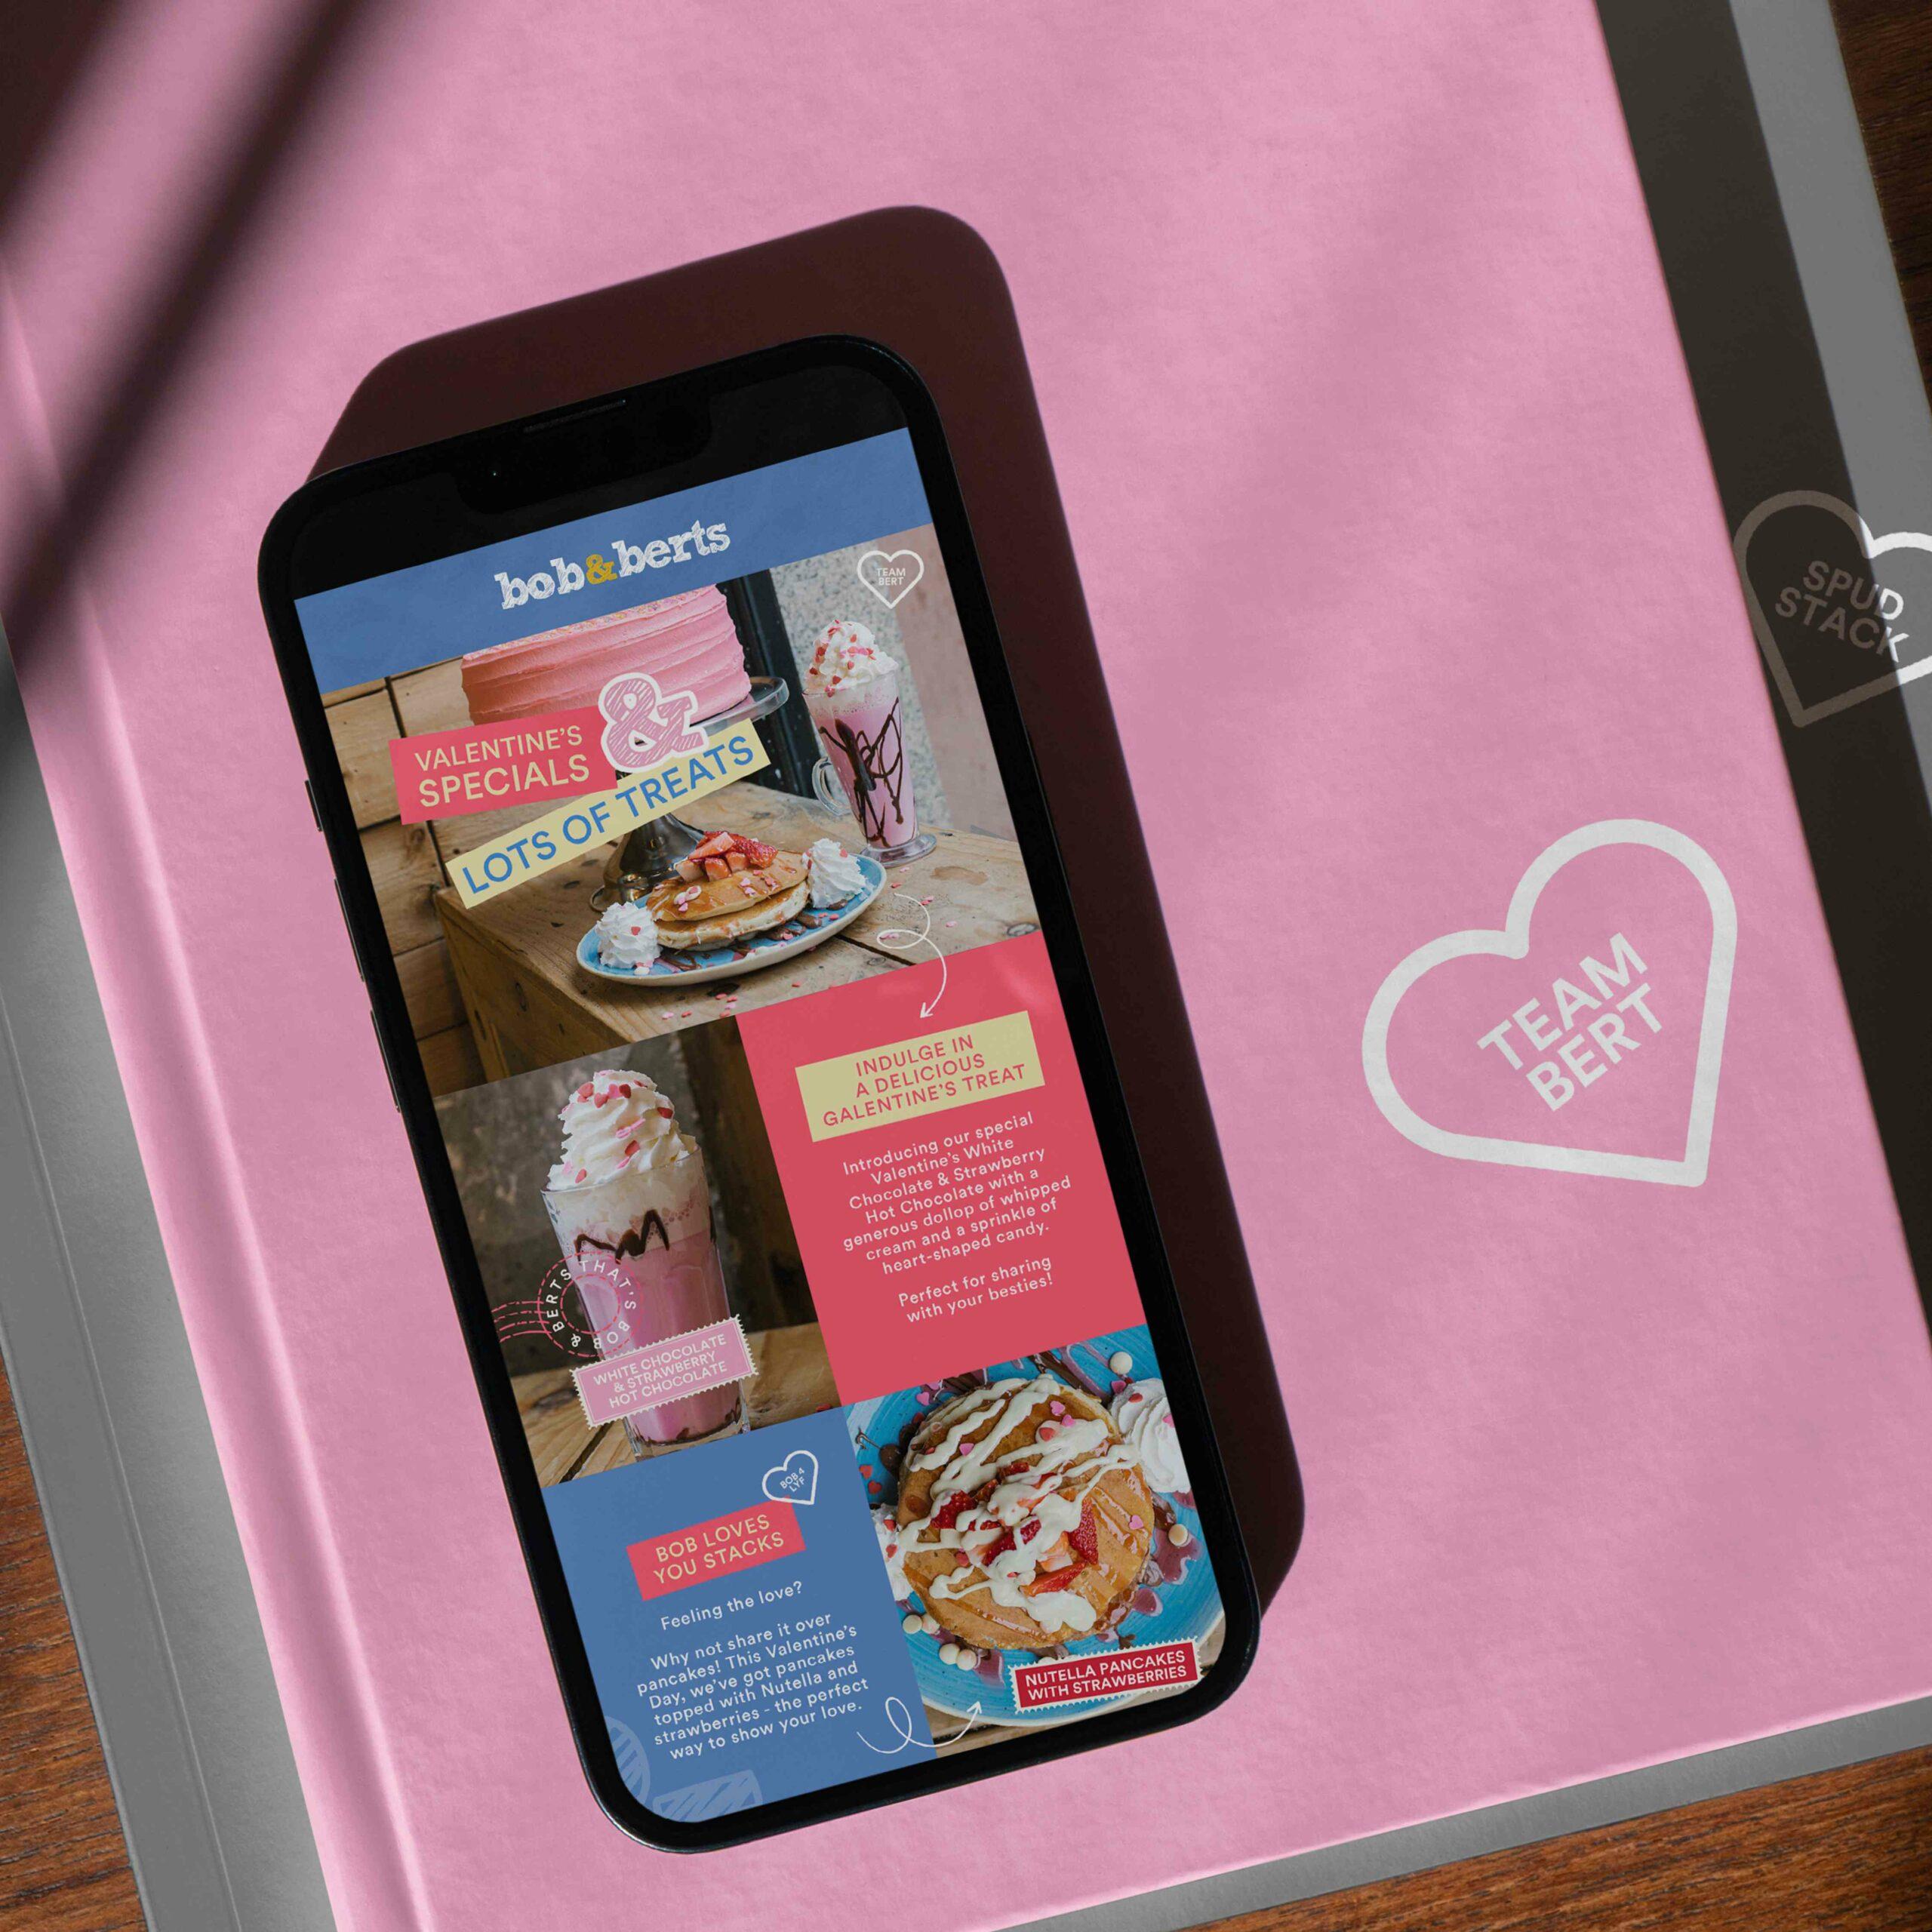 An email newsletter with a pink background for Bob & Berts Valentine's Day campaign design by Rapid Agency